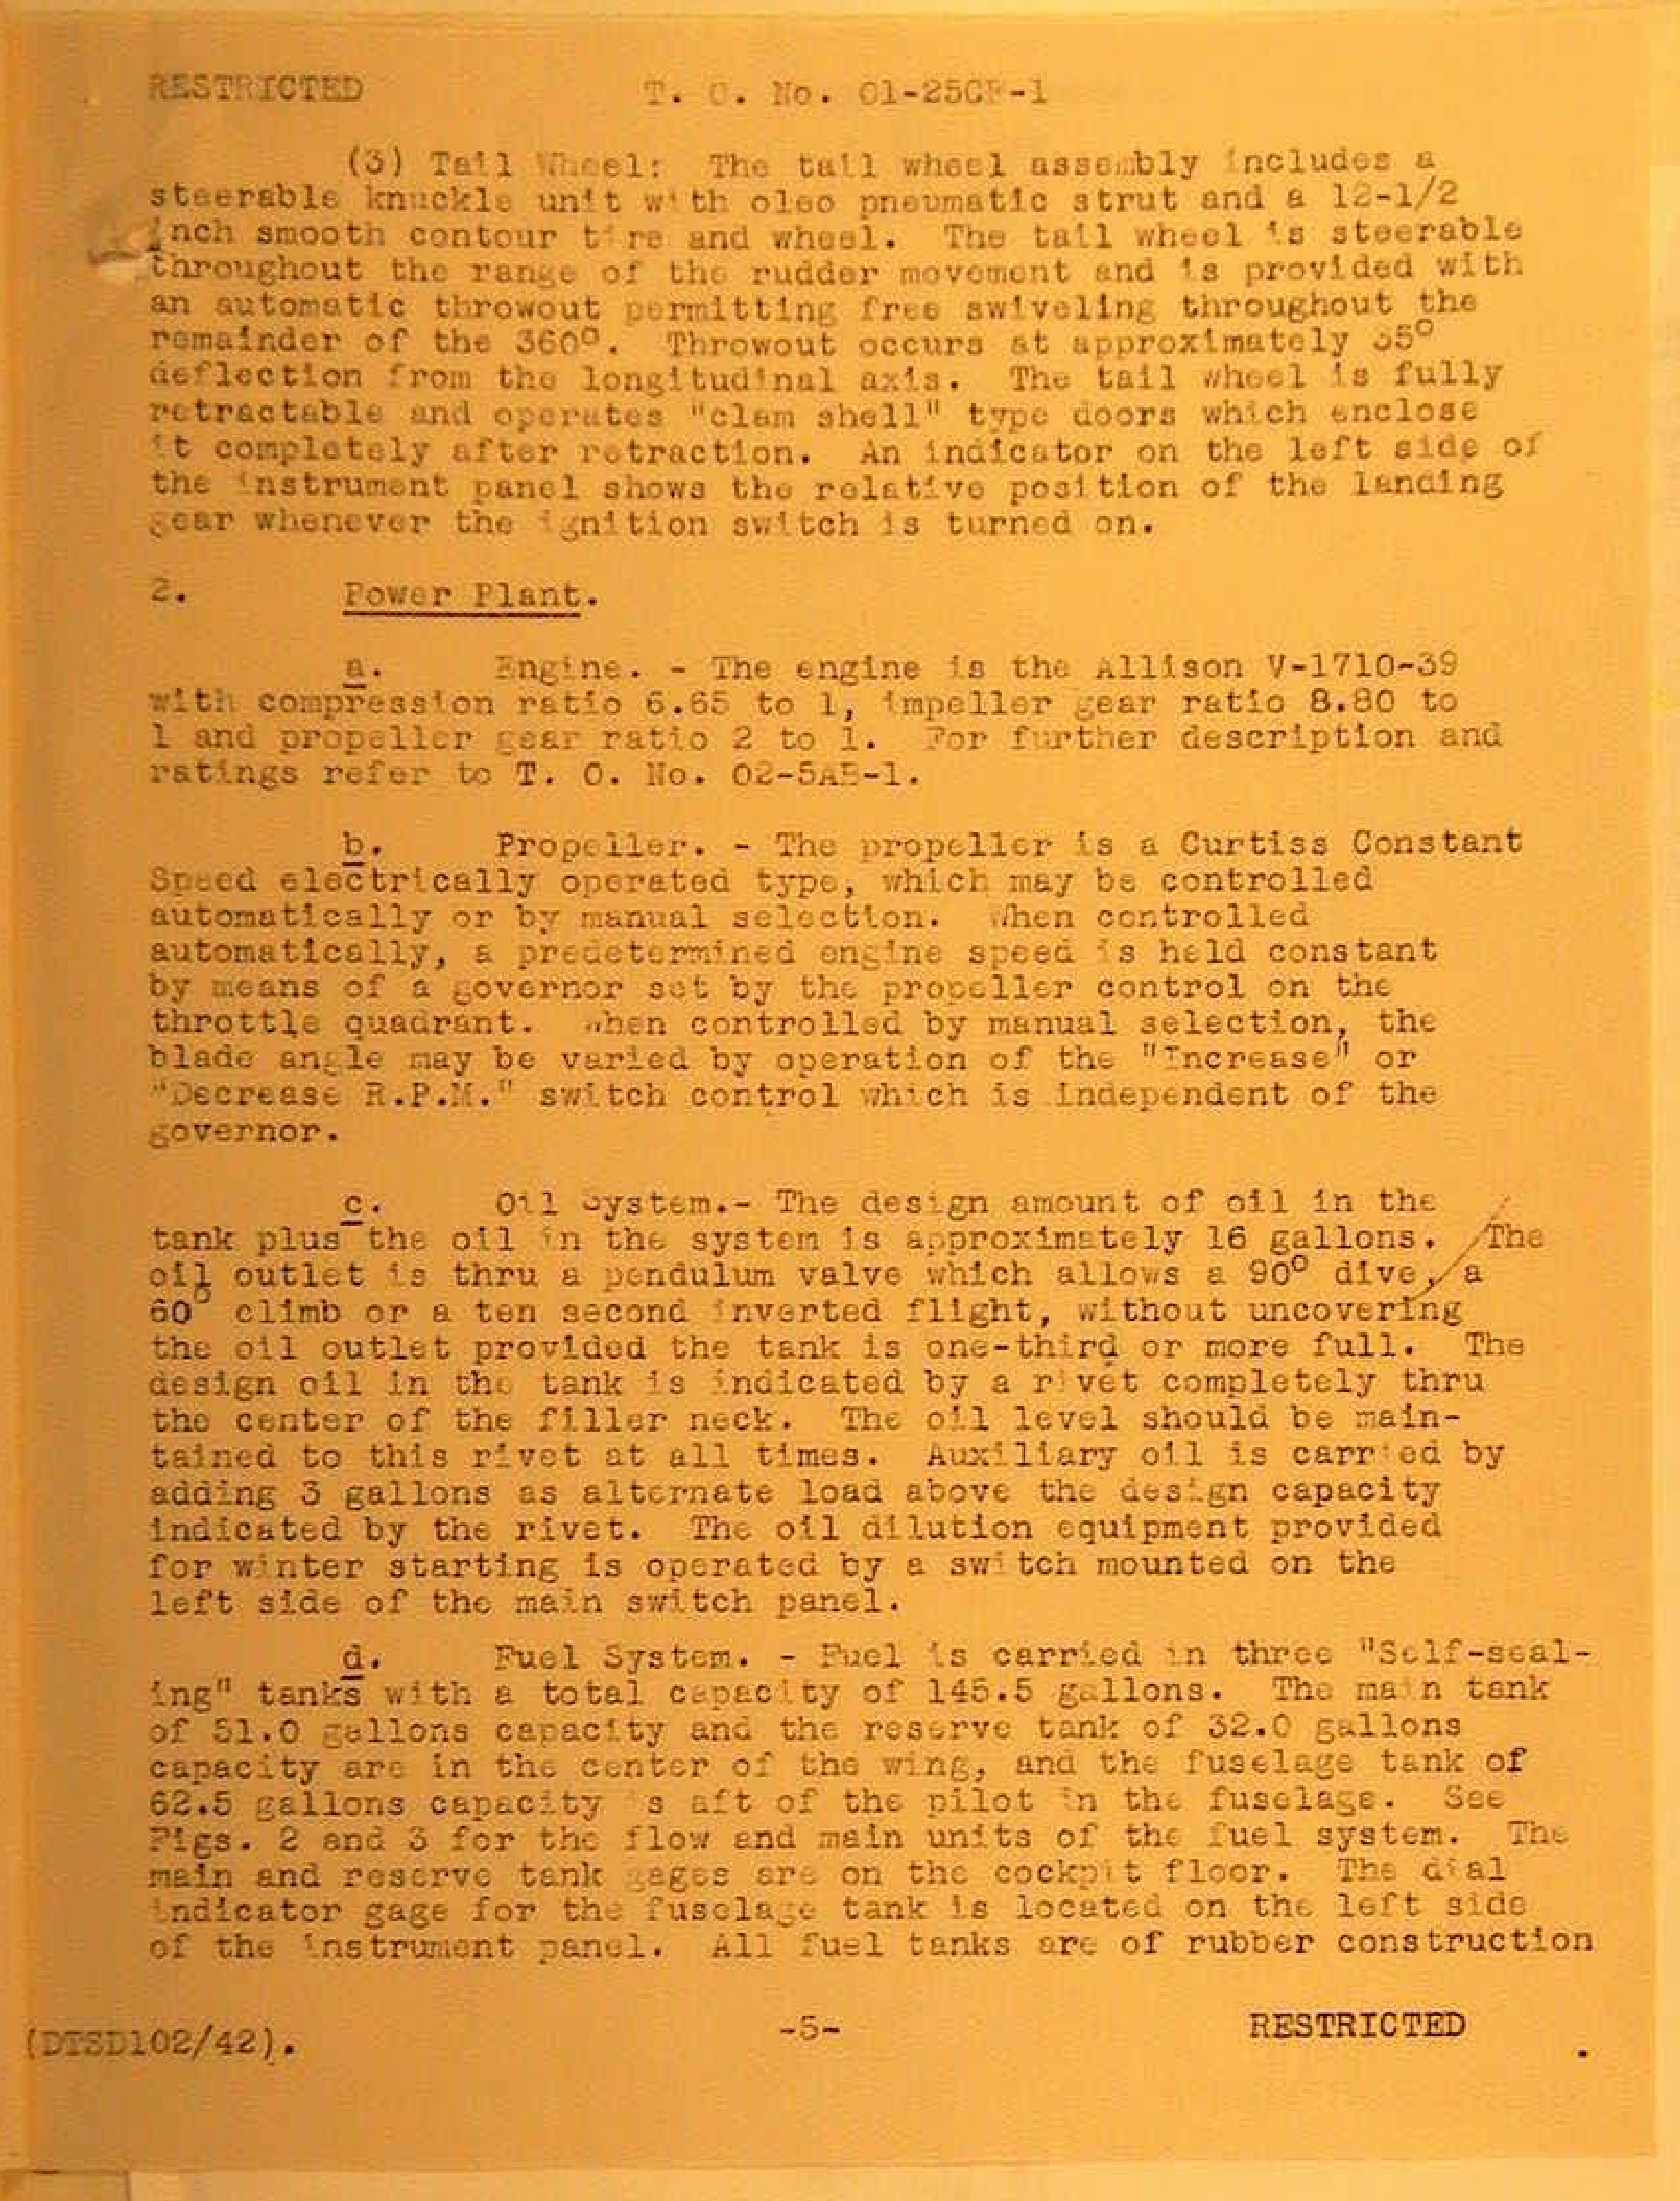 Sample page 5 from AirCorps Library document: Operation and Flight Instructions for P-40D and P-40E